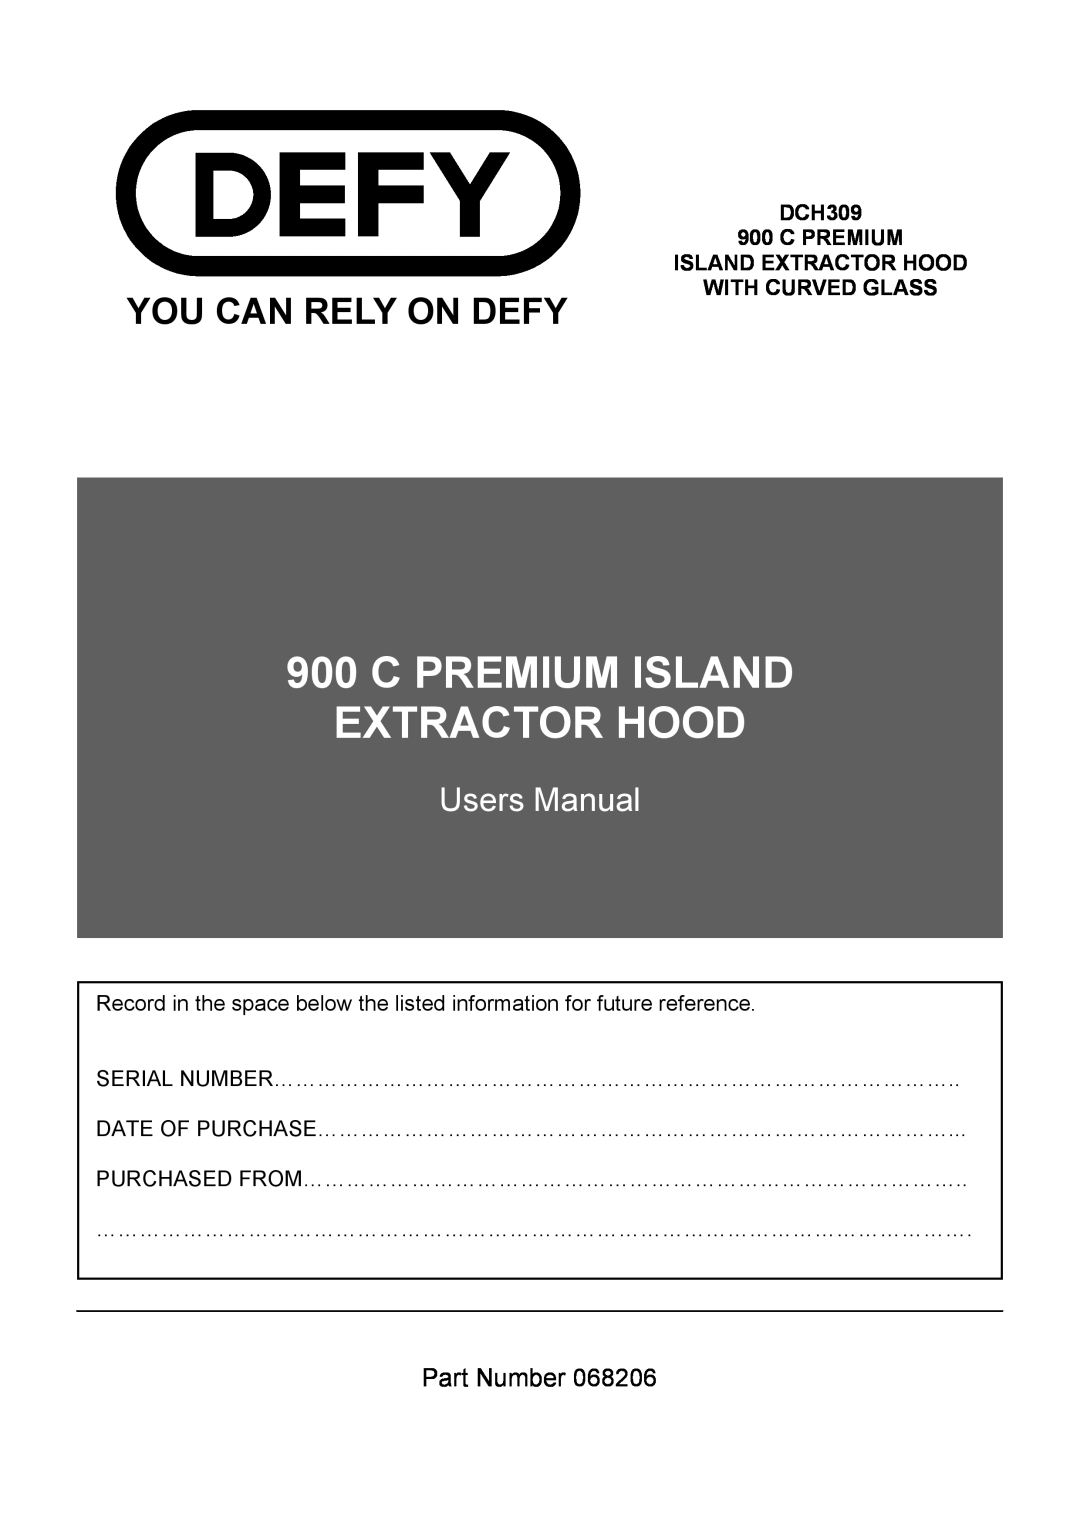 Defy Appliances DCH309 manual C Premium Island Extractor Hood, You Can Rely On Defy, Part Number 